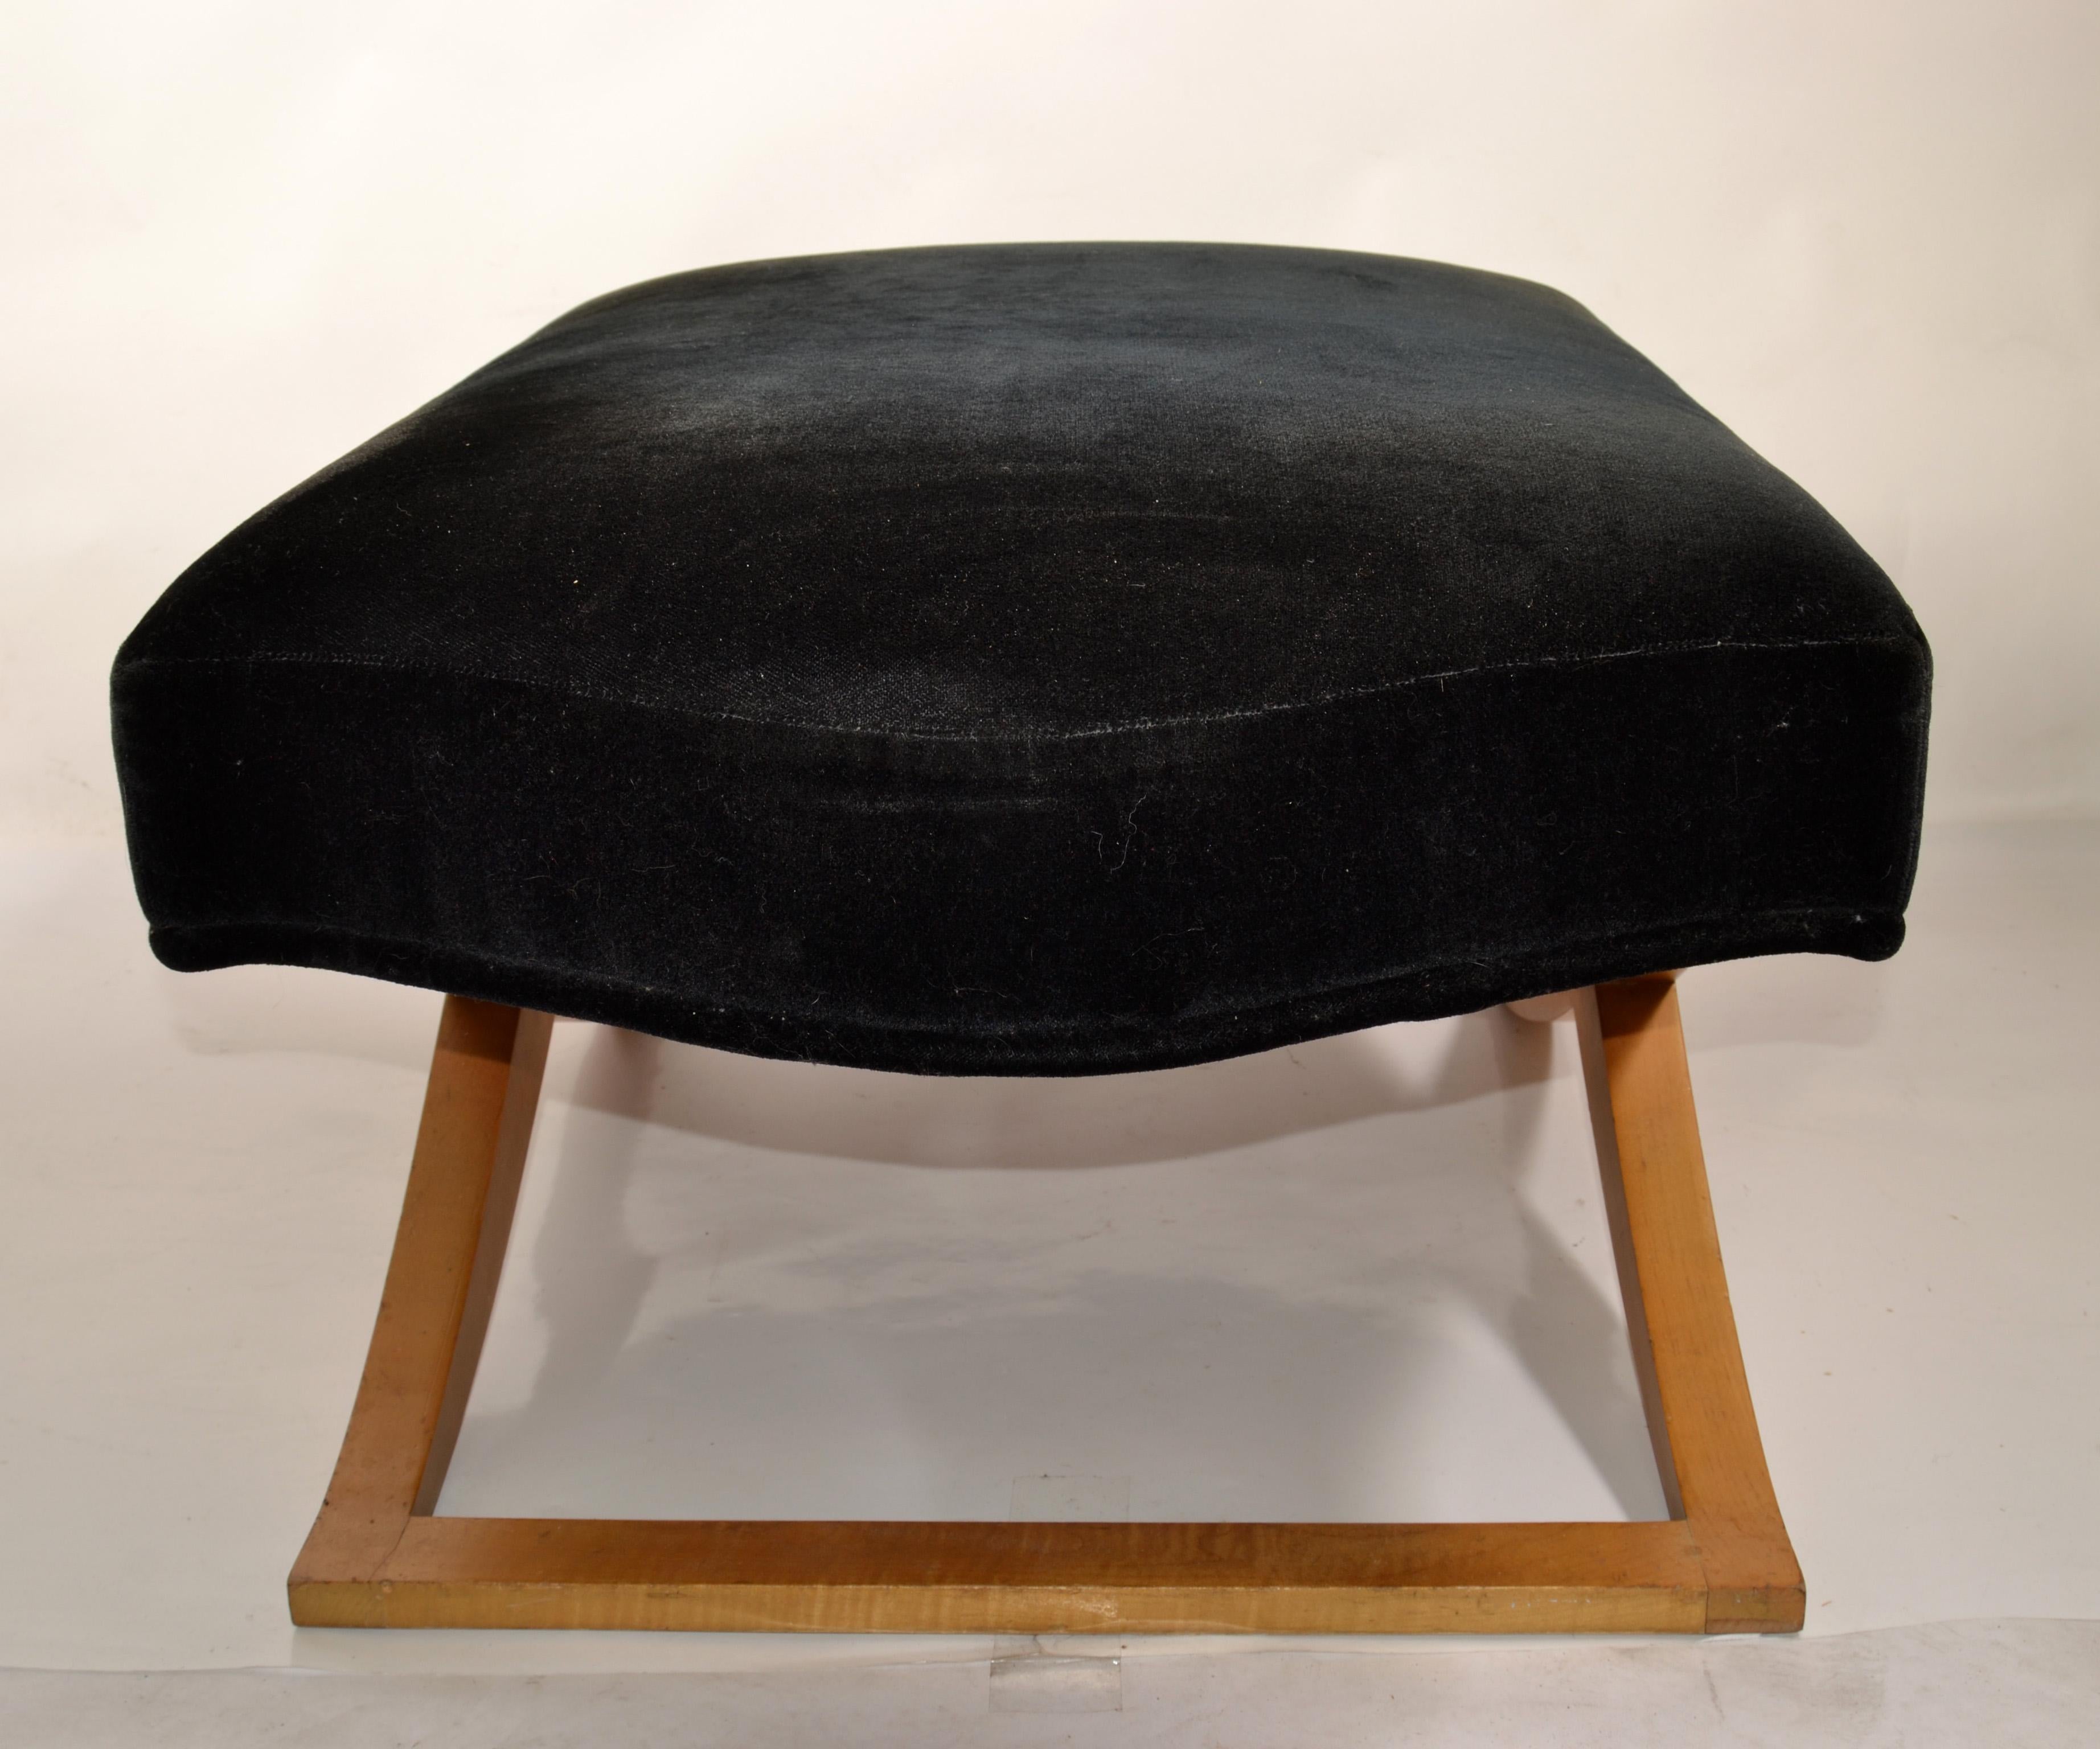 Hand-Crafted 1990 Donghia Versailles Black Mohair Blonde Wood Stool Bench Ottoman John Hutton For Sale